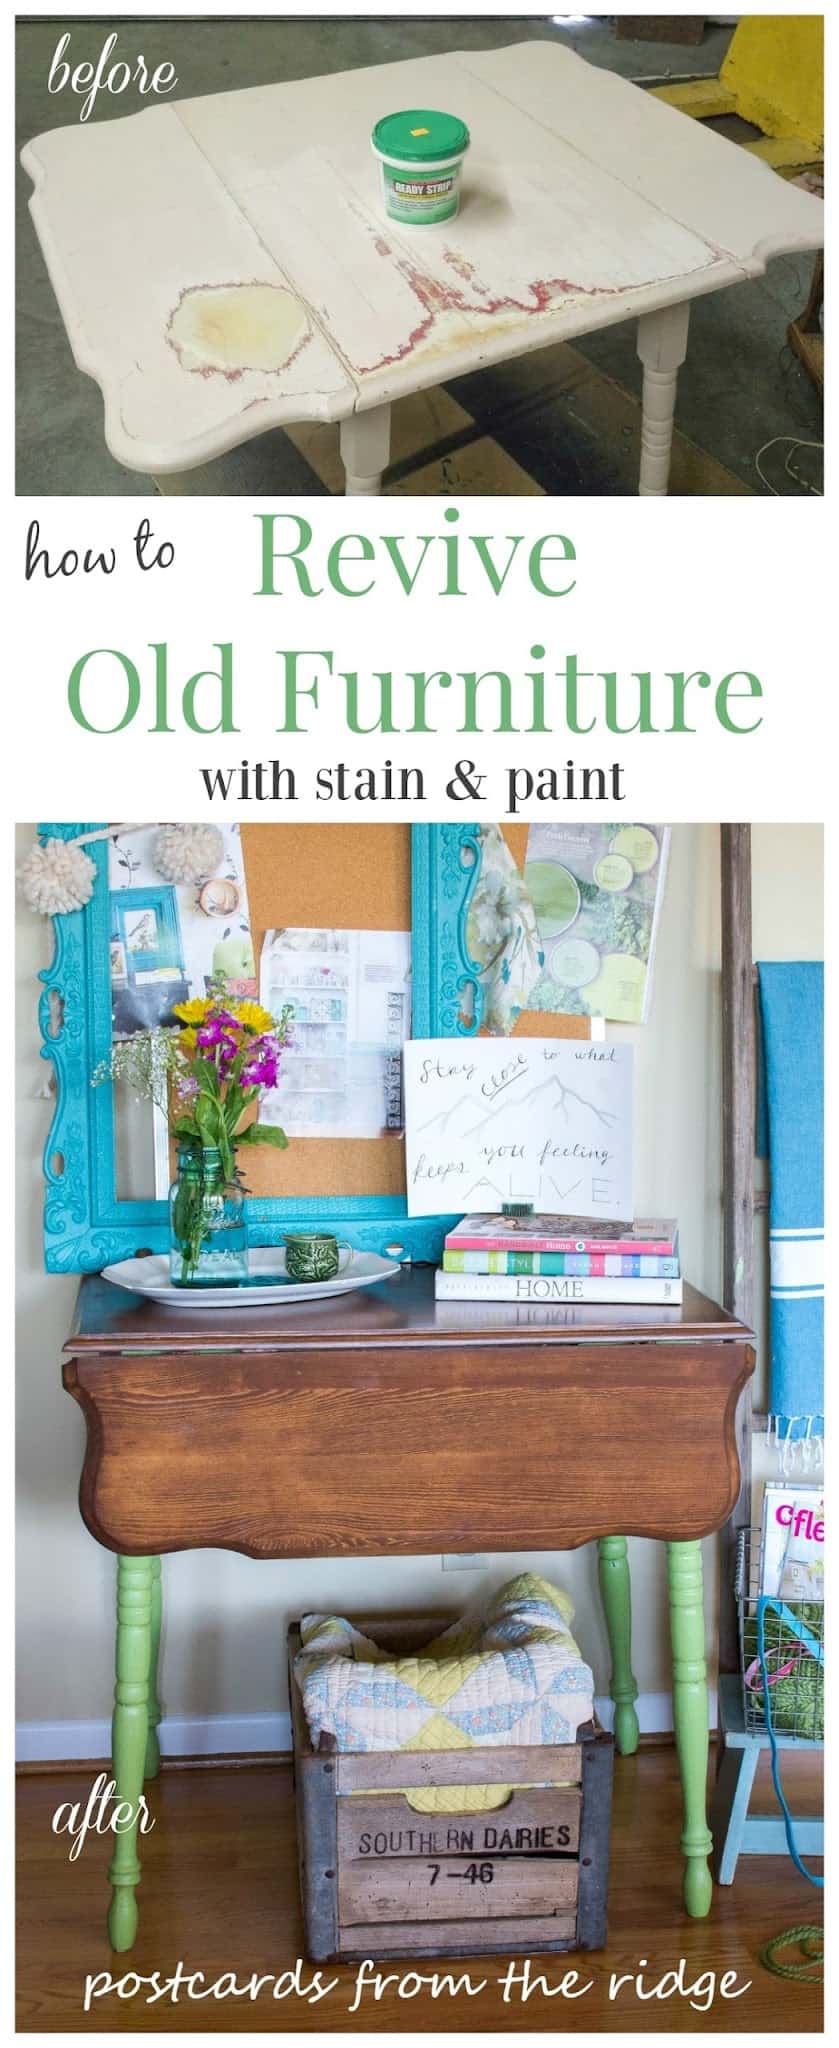 How to Revive Old Furniture with Paint and Stain